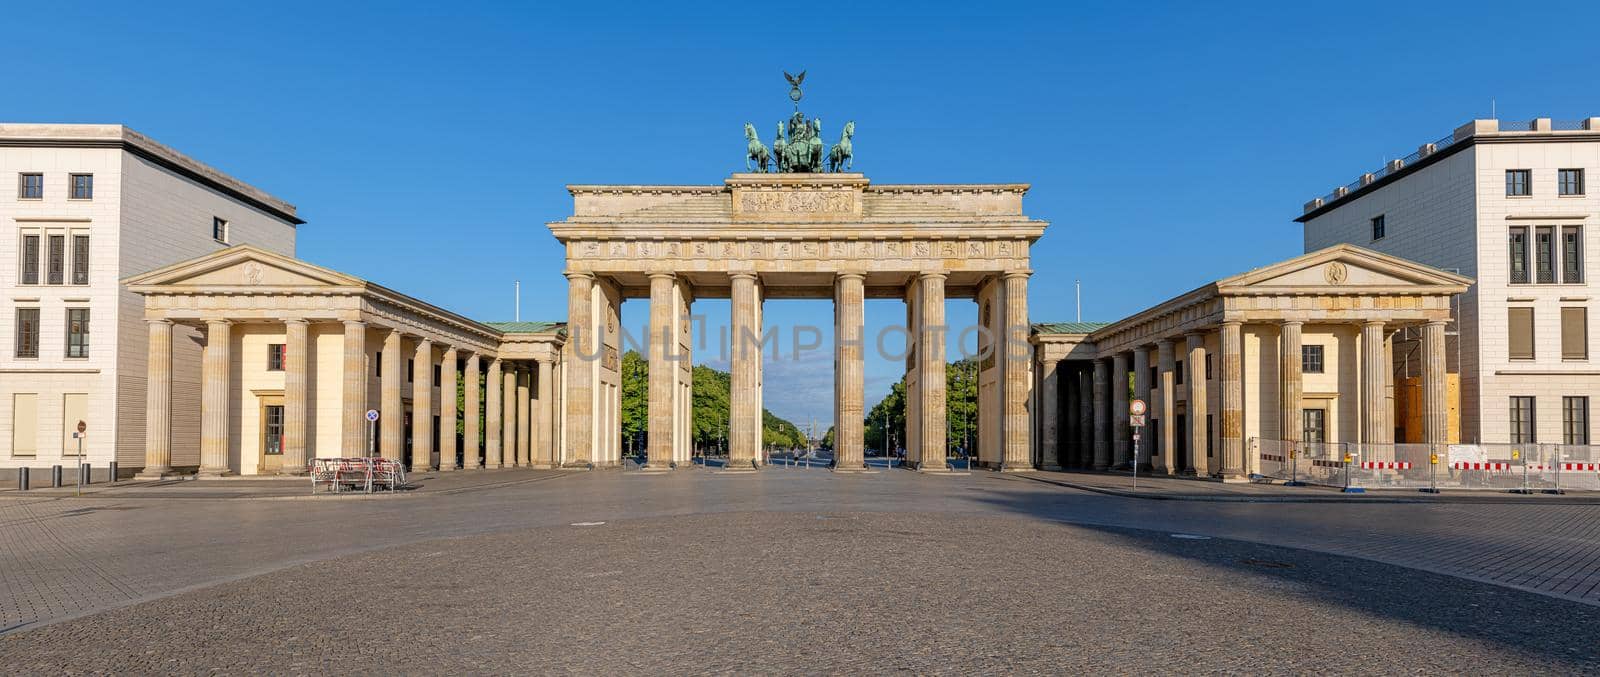 Panorama of the famous Brandenburg Gate in Berlin early in the morning with no people